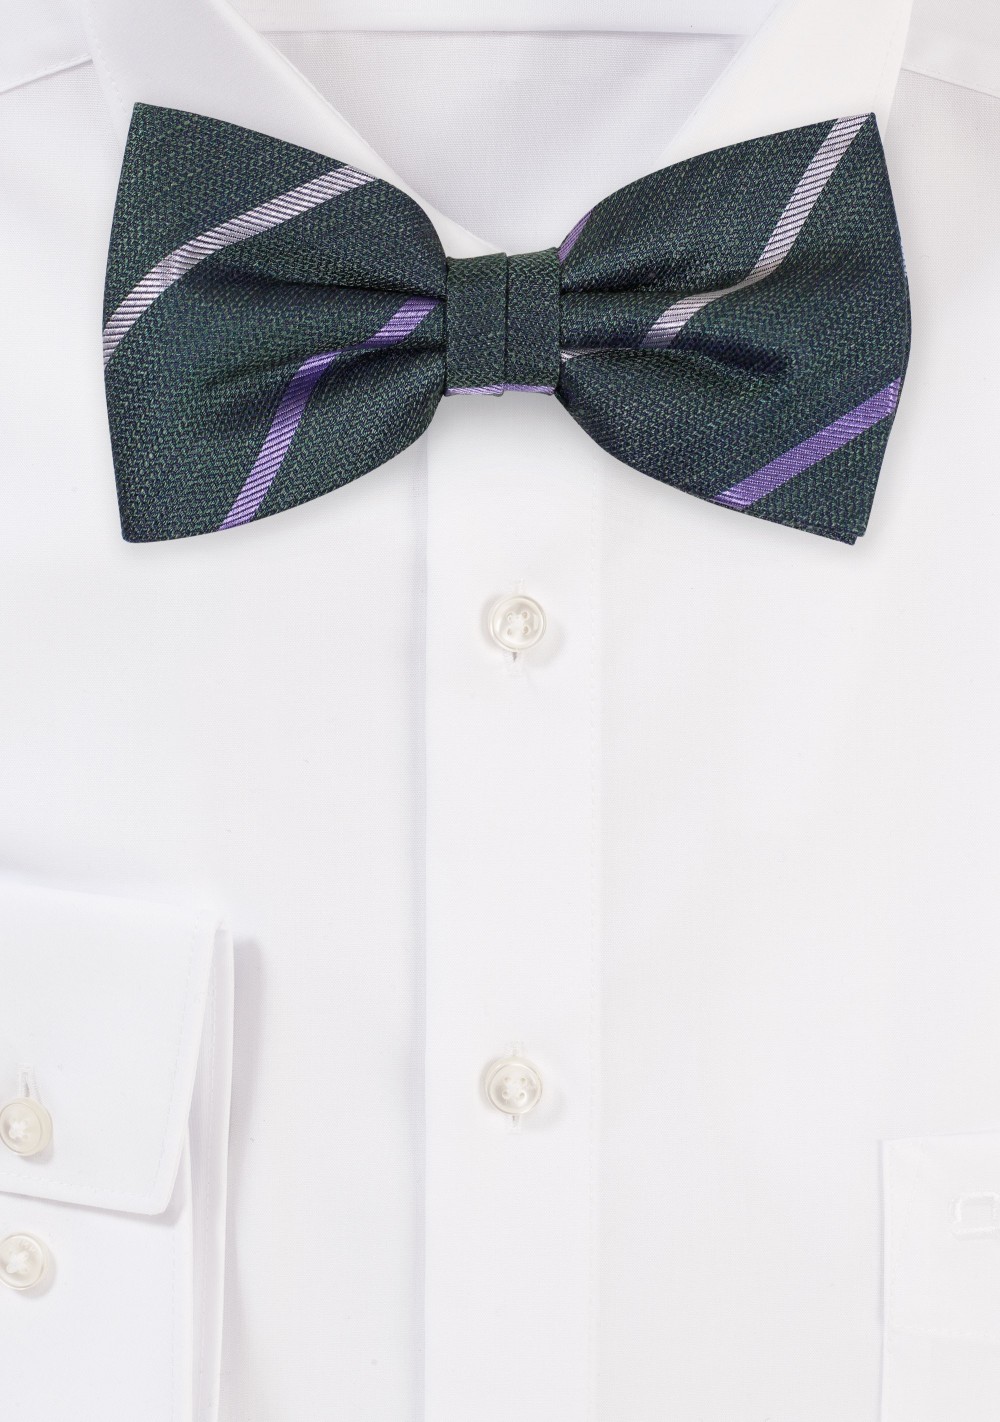 Pine Green Bow Tie with Blue Stripes